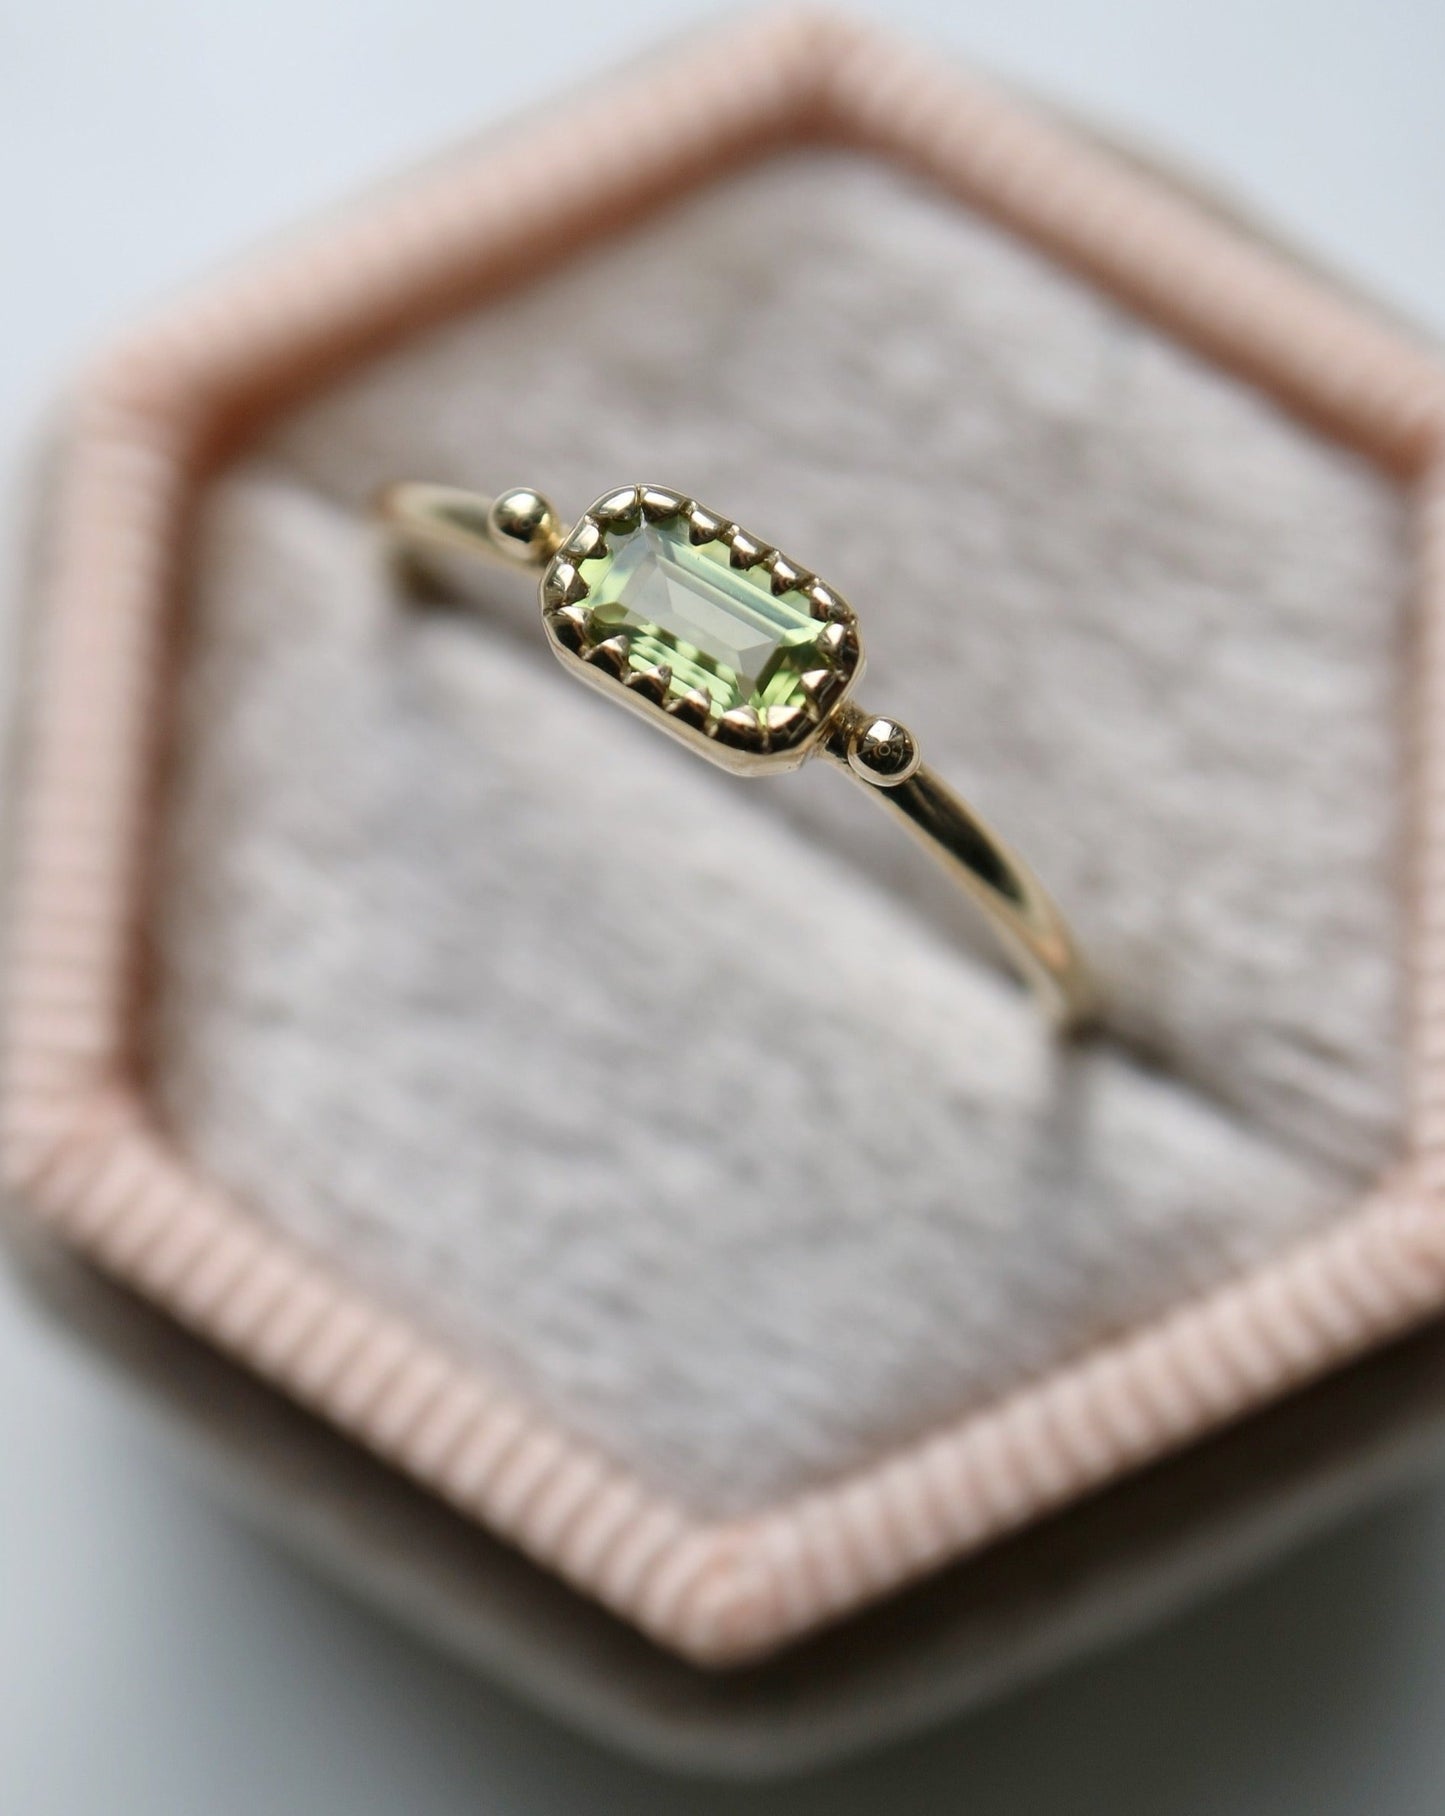 9ct gold Olivine Ring from That's My Story